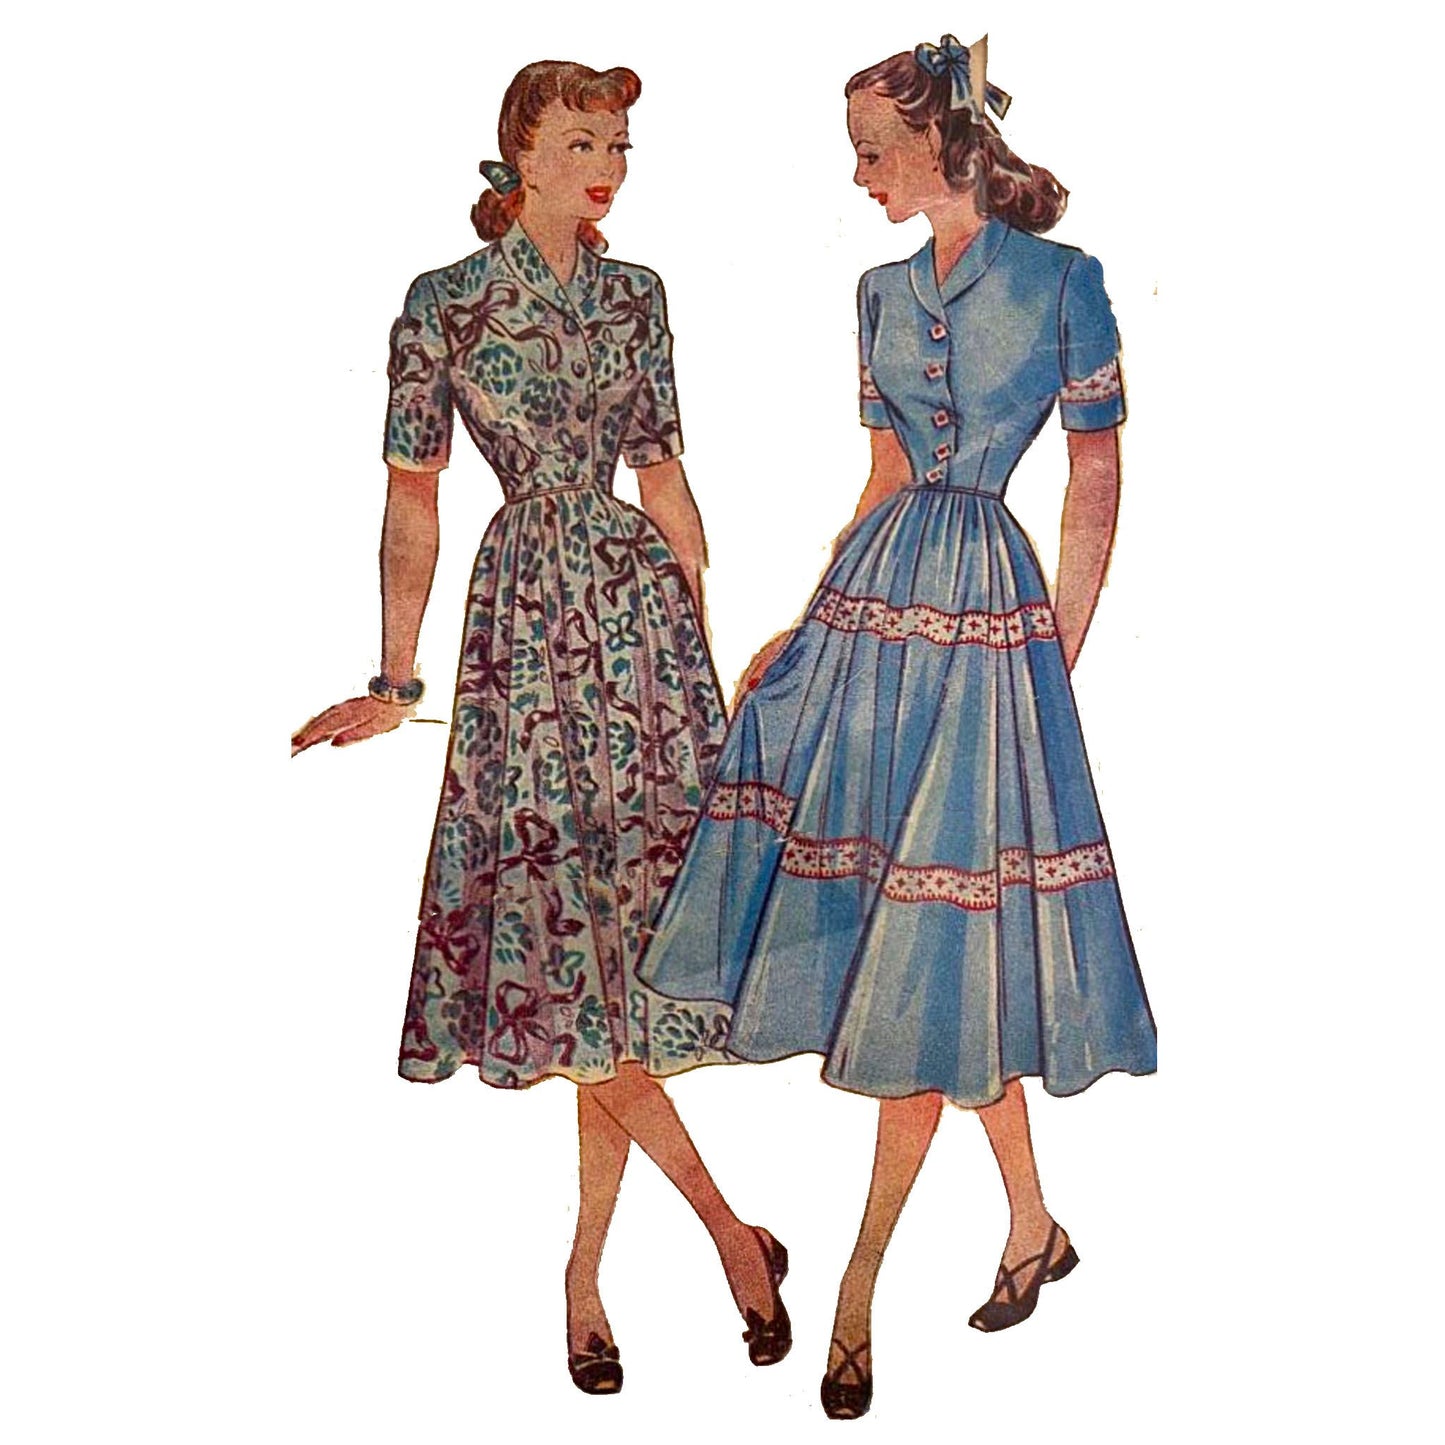 Model wearing 1940s dress made from Economy Design E197 pattern